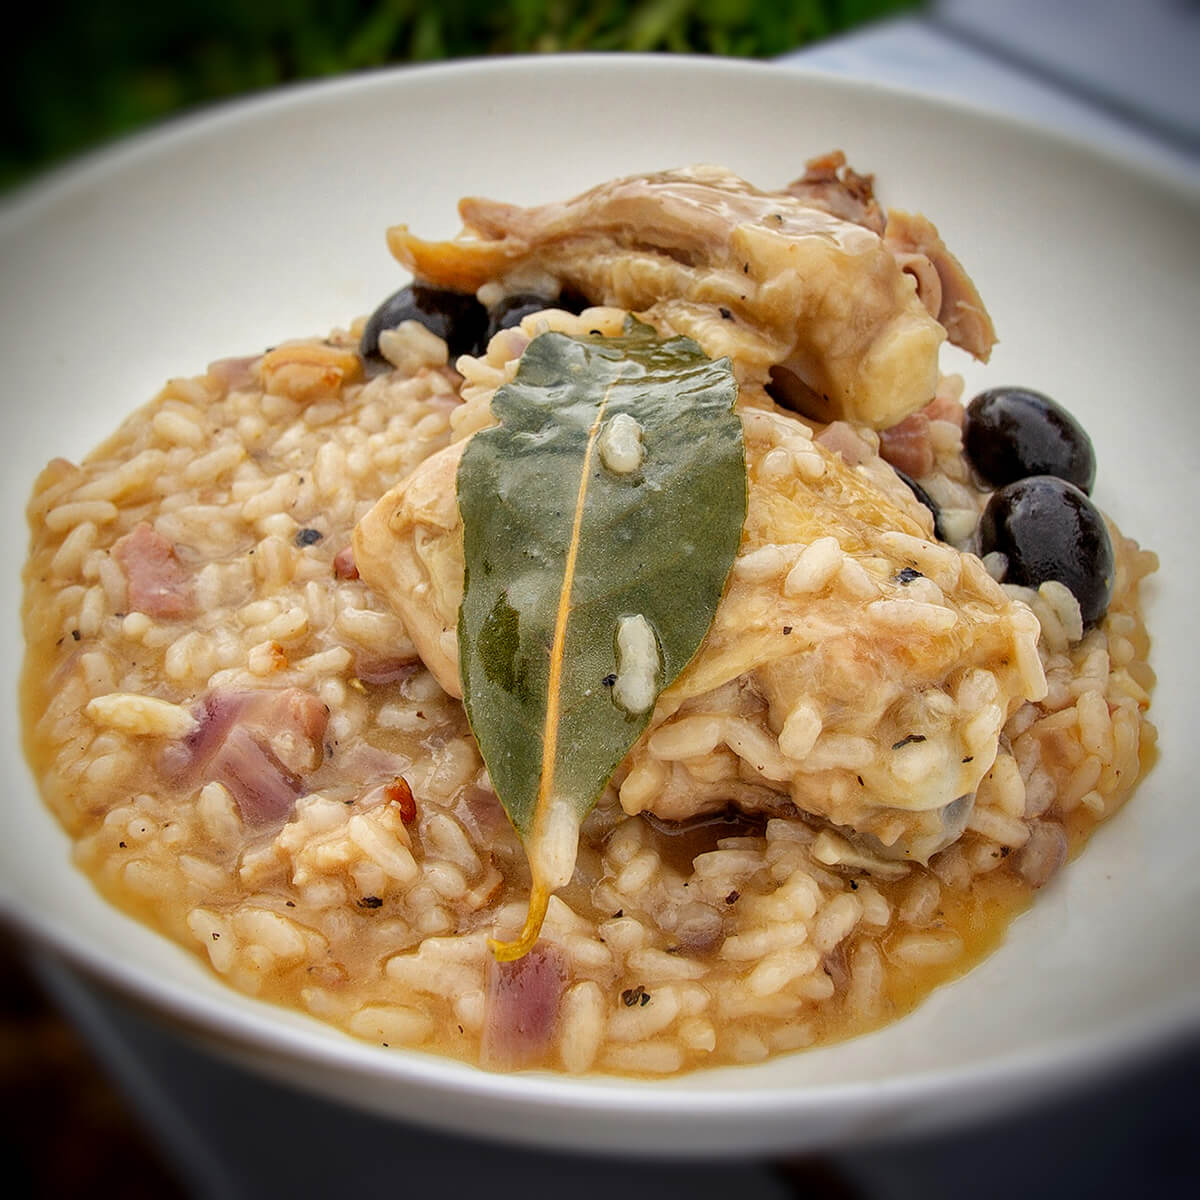 Bowl of risotto